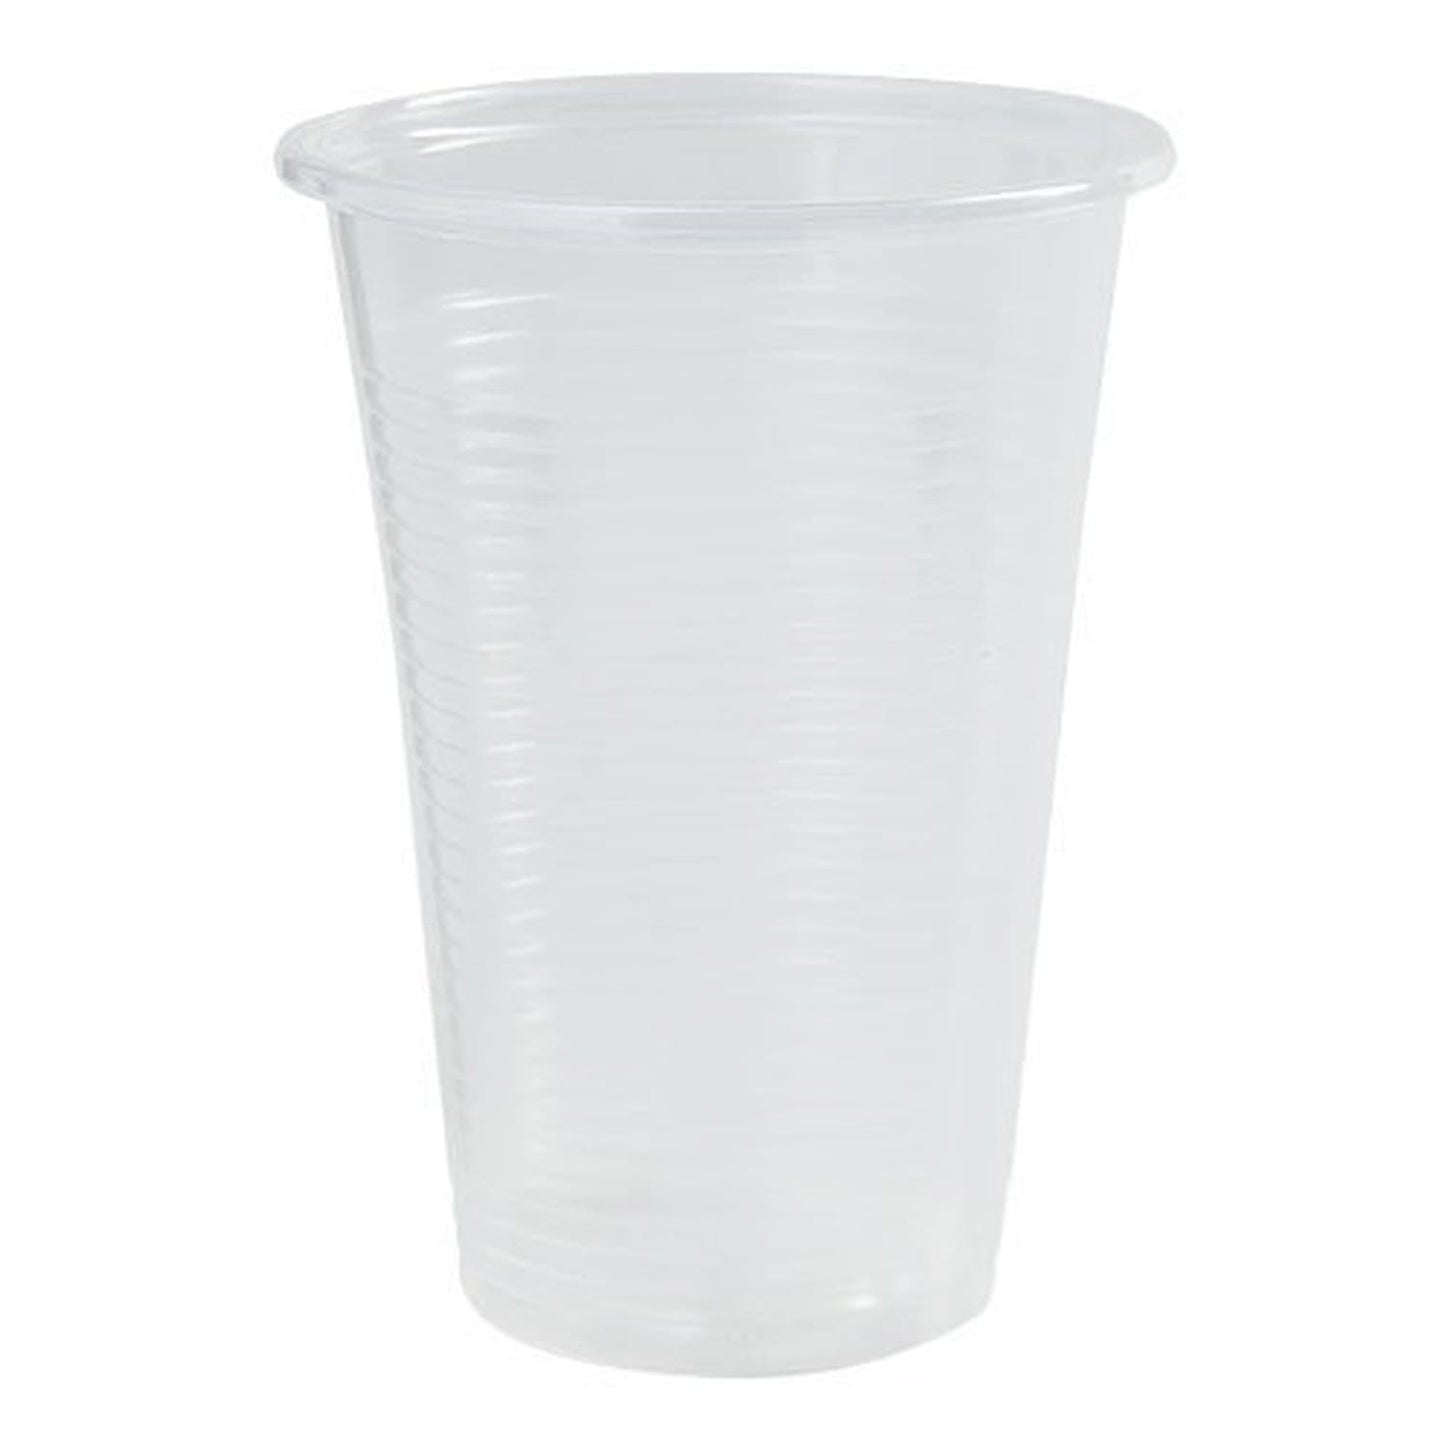 https://onlyonestopshop.com/cdn/shop/products/Nicole-Home-Collection-Everyday-Transparent-Plastic-Cup-7-oz-Nicole-Collection-1603926115.jpg?v=1611177603&width=1445